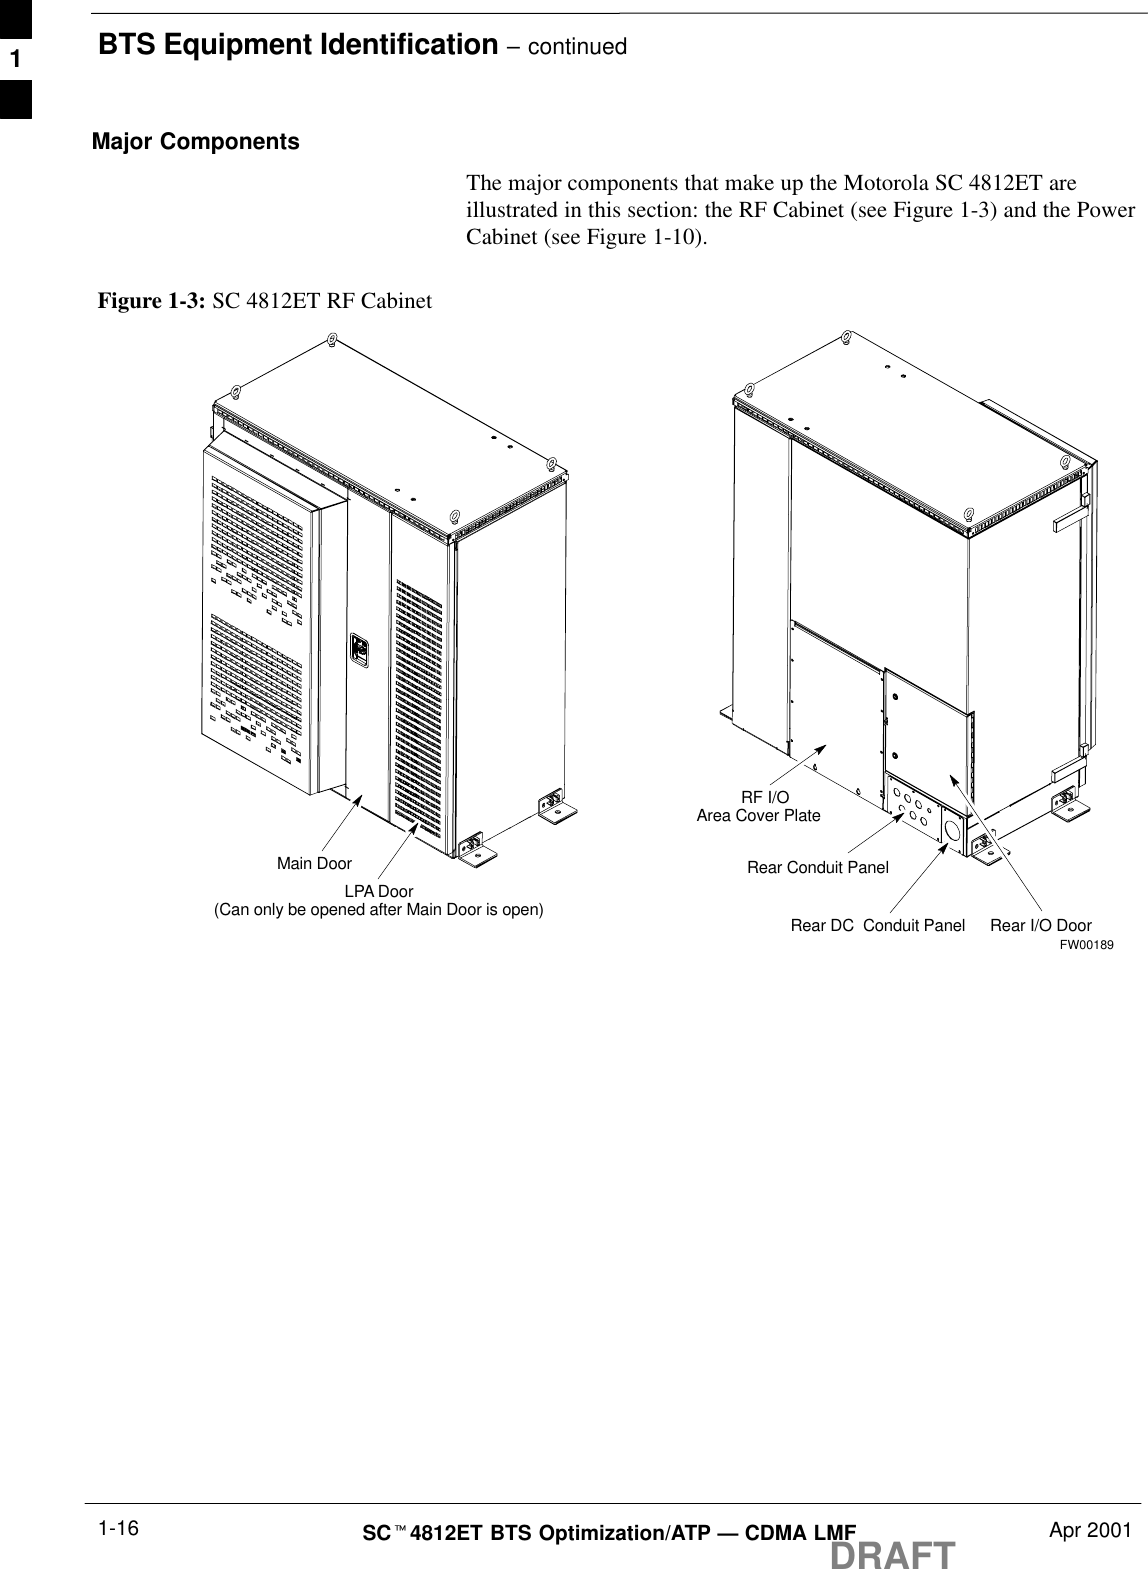 BTS Equipment Identification – continuedDRAFTSCt4812ET BTS Optimization/ATP — CDMA LMF Apr 20011-16Major ComponentsThe major components that make up the Motorola SC 4812ET areillustrated in this section: the RF Cabinet (see Figure 1-3) and the PowerCabinet (see Figure 1-10).Figure 1-3: SC 4812ET RF CabinetMain DoorLPA Door(Can only be opened after Main Door is open)RF I/OArea Cover PlateRear I/O DoorRear DC  Conduit PanelRear Conduit PanelFW001891